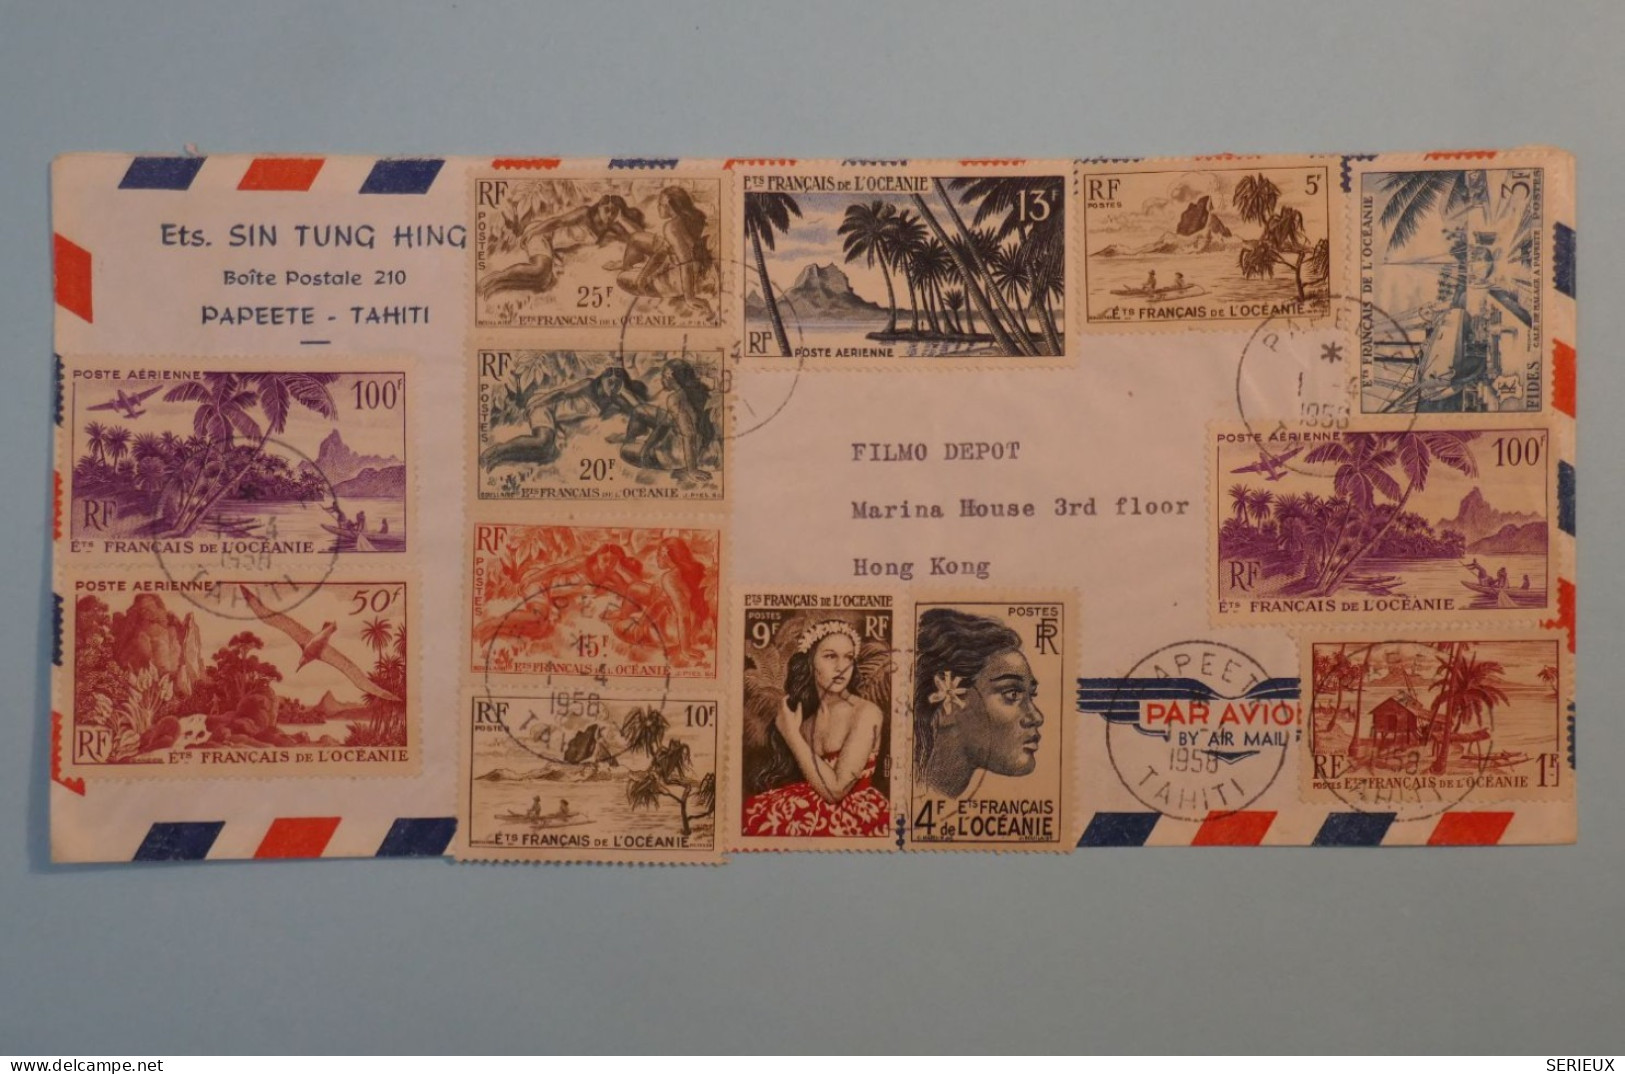 BT 16 ETAB. OCEANIE  BELLE LETTRE  RARE 1953 BY AIR MAIL  PAPEETE  A HONG KONG CHINA +AFFR SPECTACULAIRE +++ - Lettres & Documents